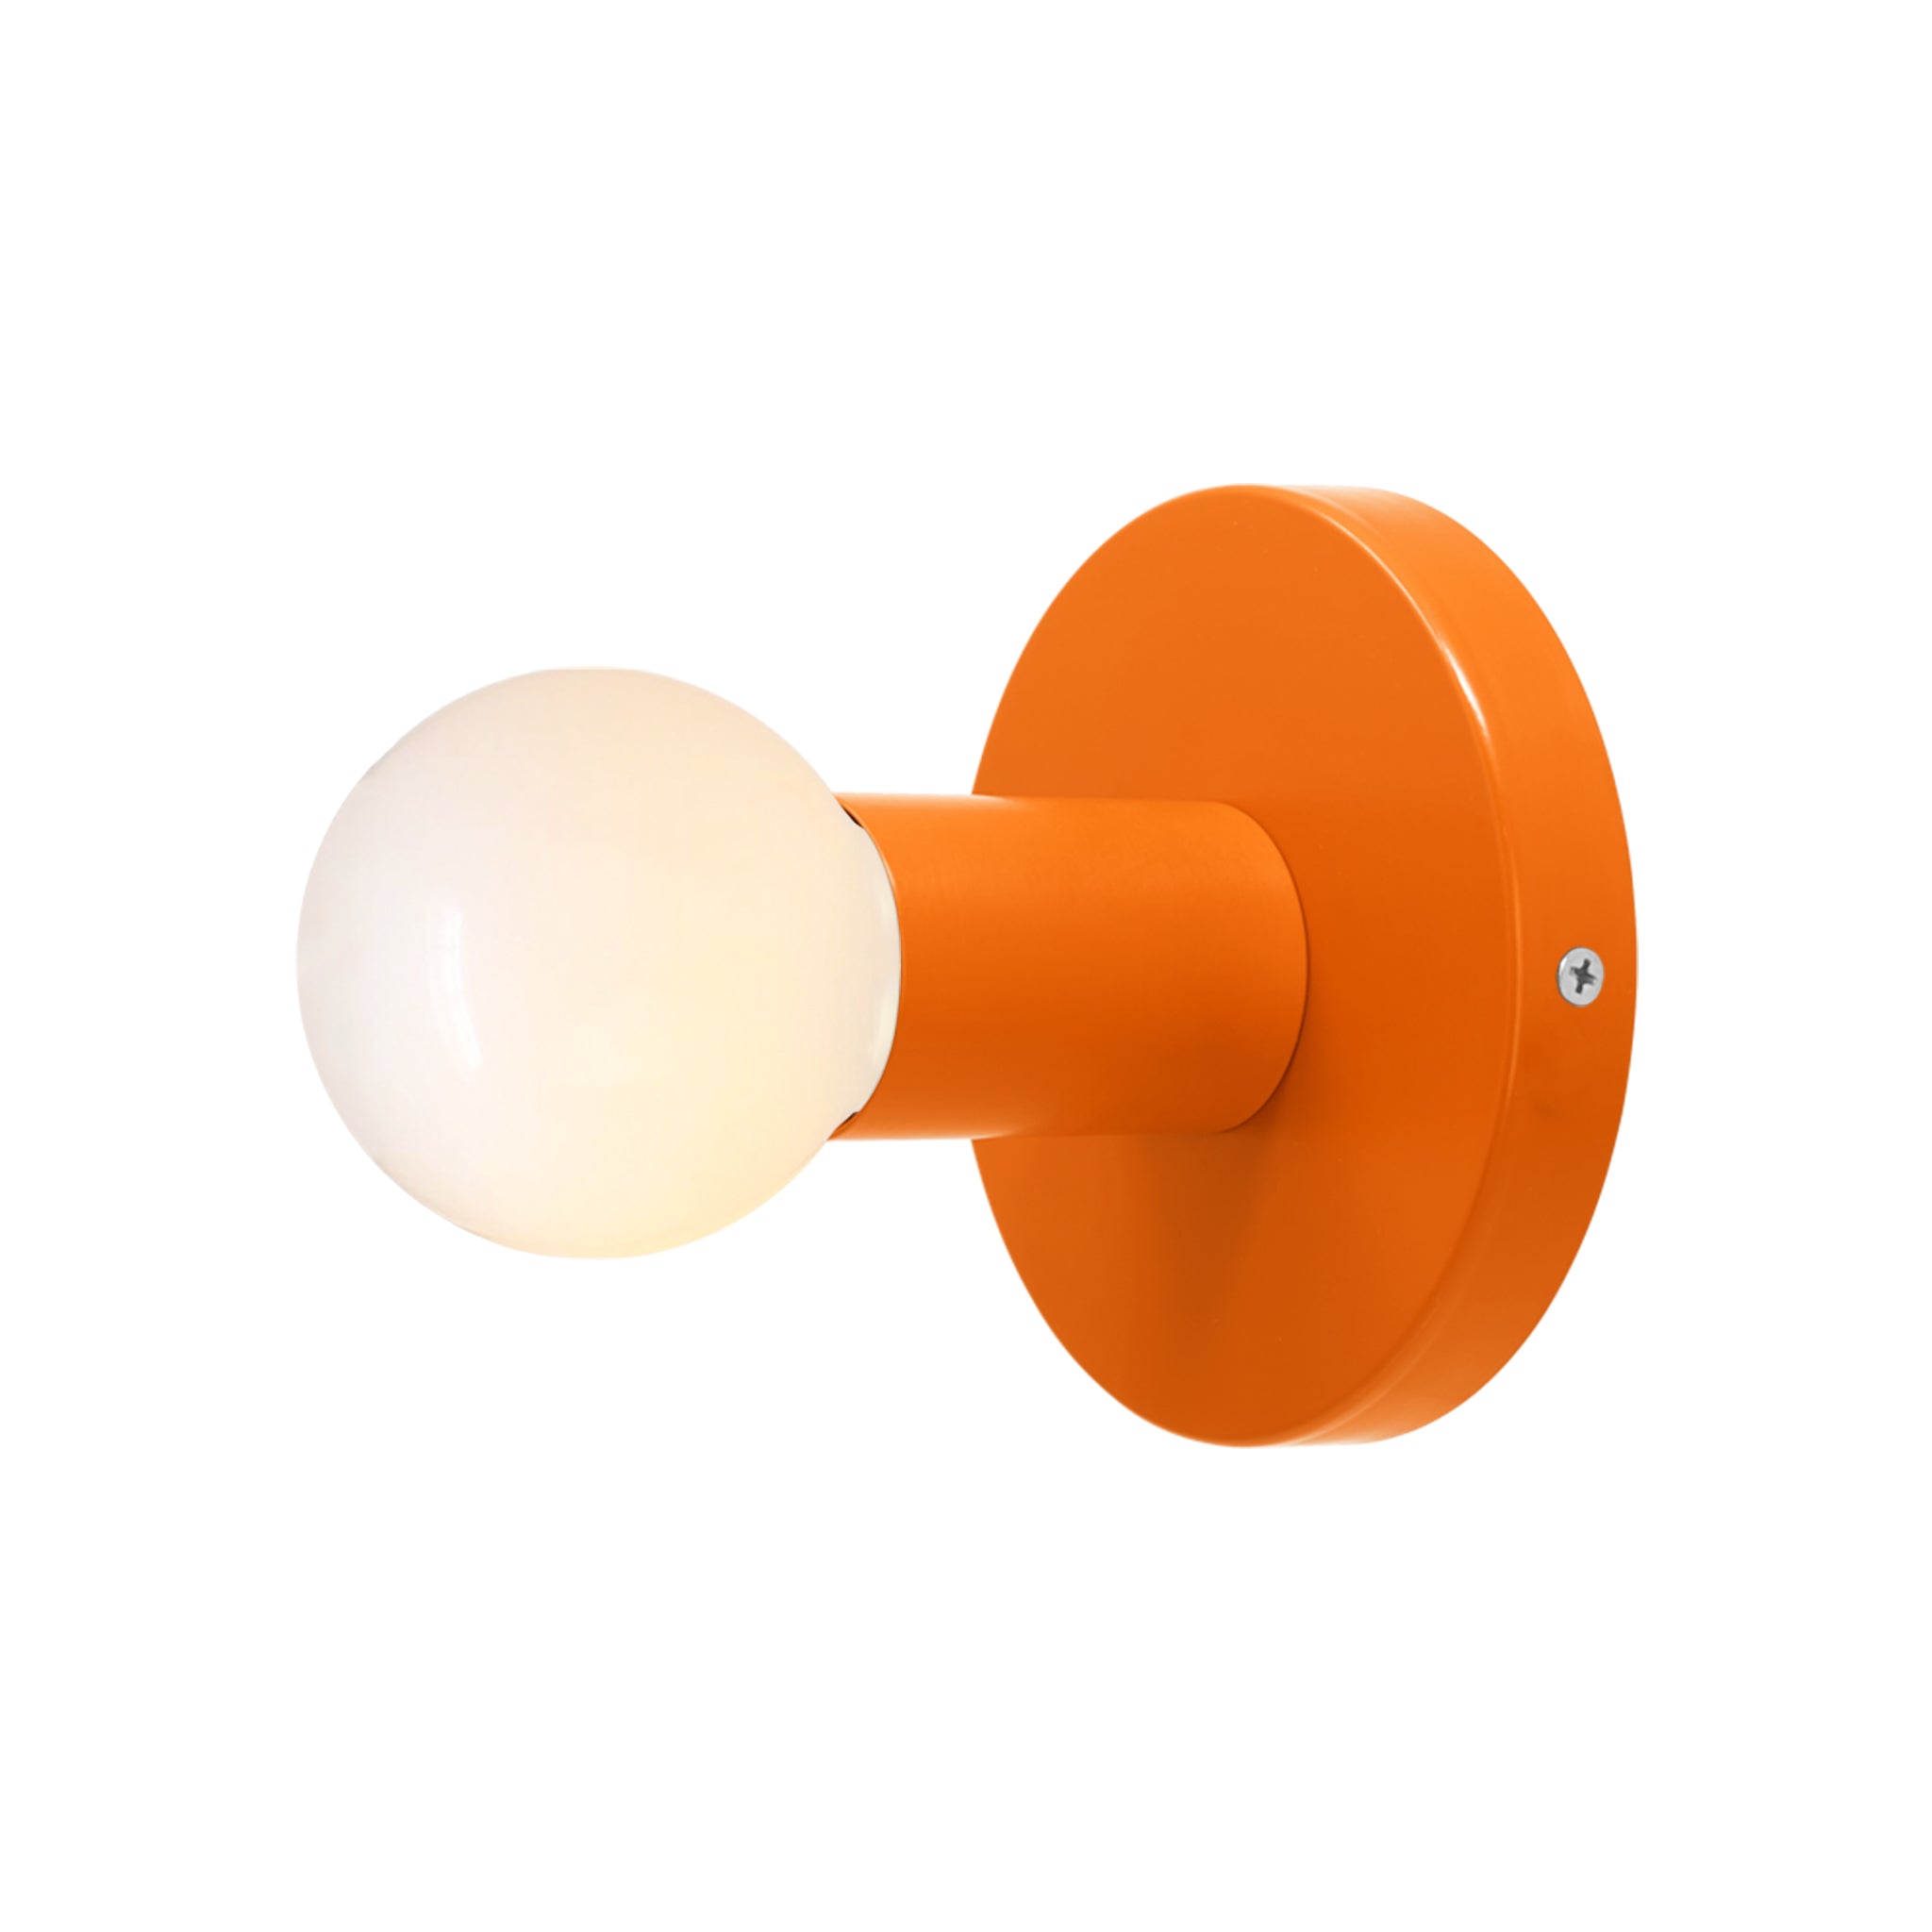 Nickel and orange color Twink sconce Dutton Brown lighting